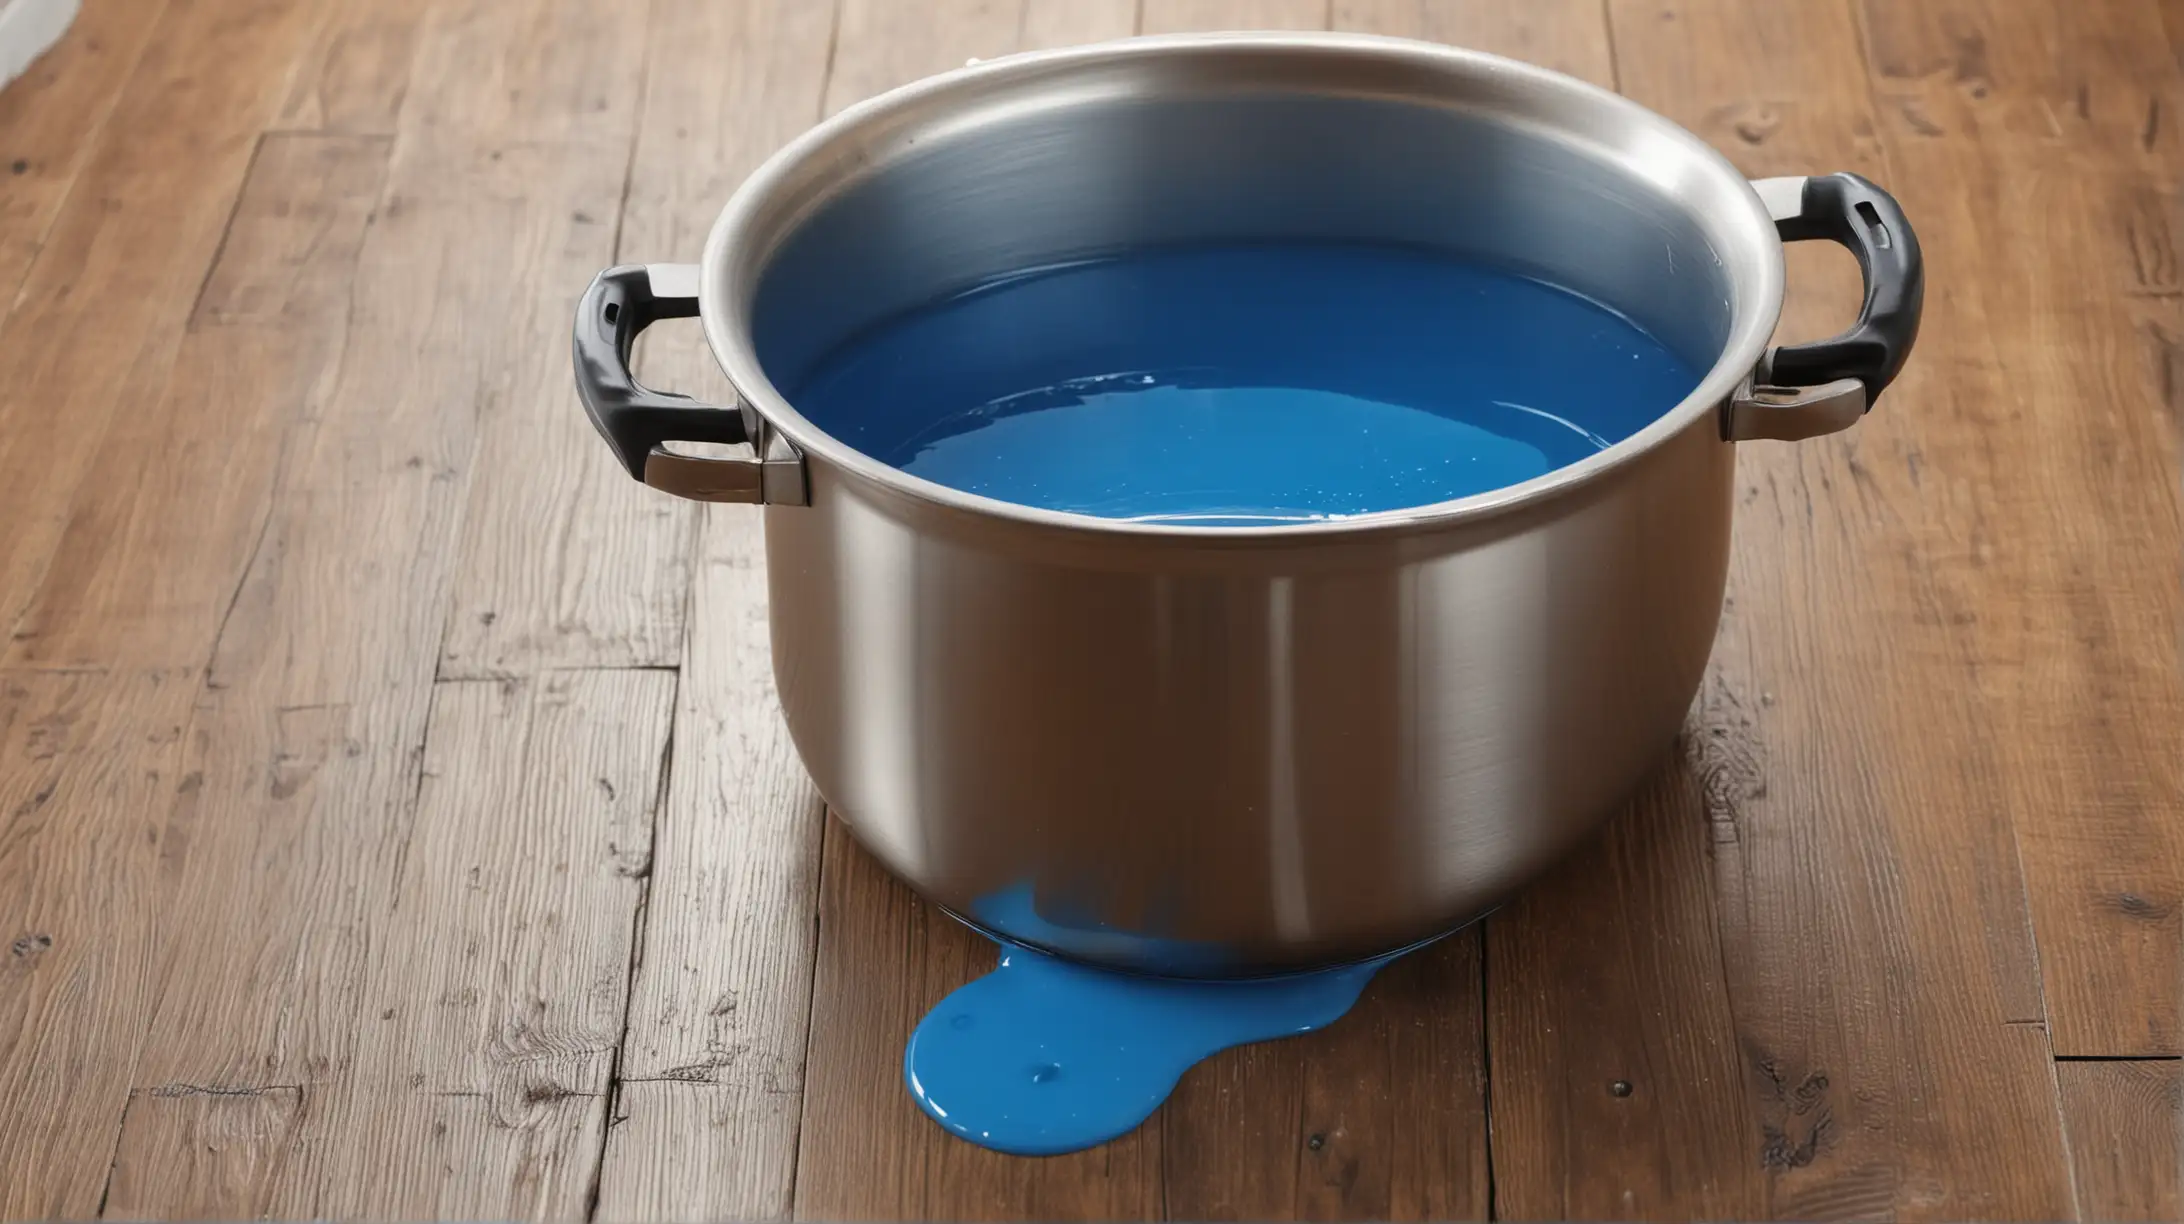 boiling pot with shiny blue liquid on wood floor. close up